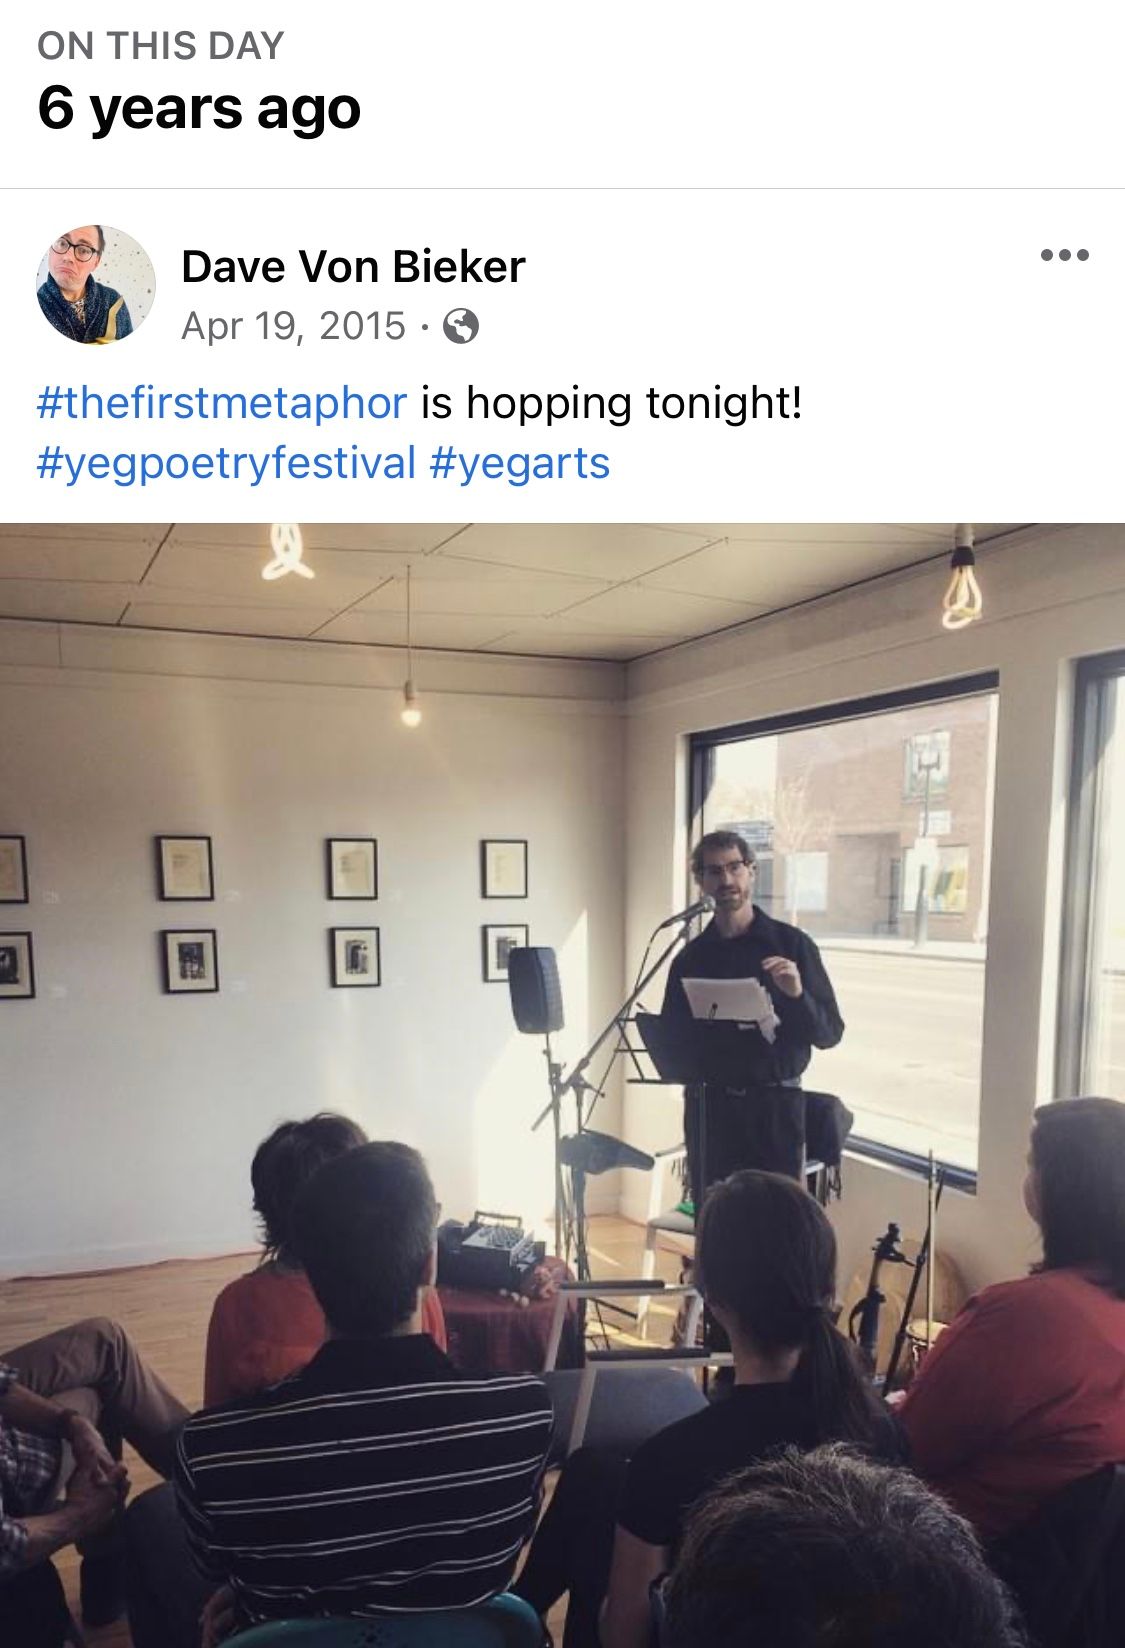 Facebook memories post from a busy poetry reading